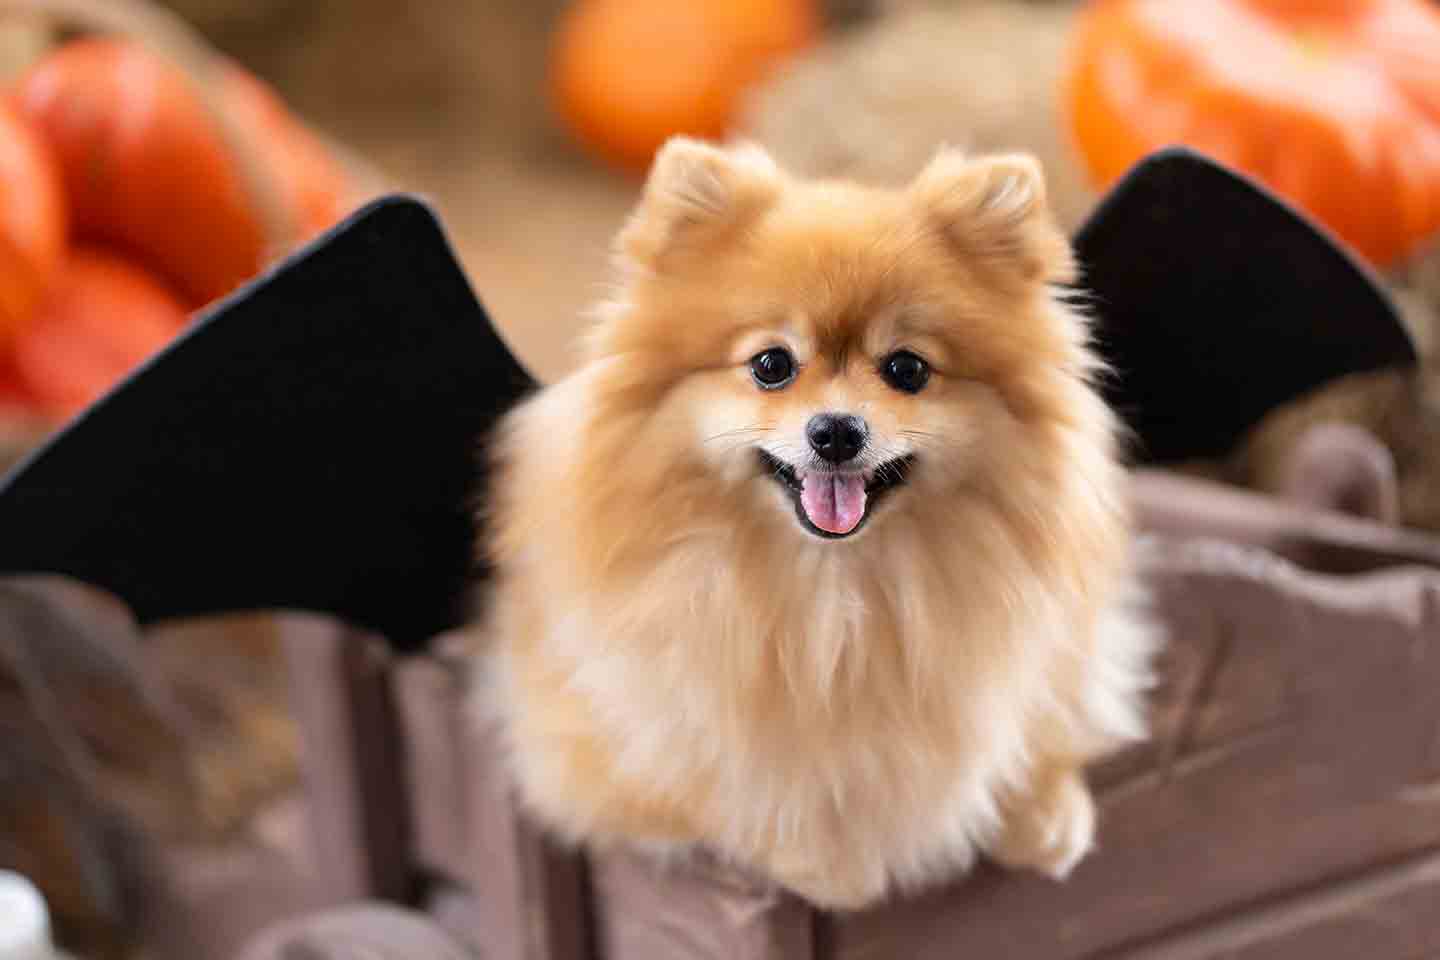 A dog in a bat costume. Pumpkins are visible in the background